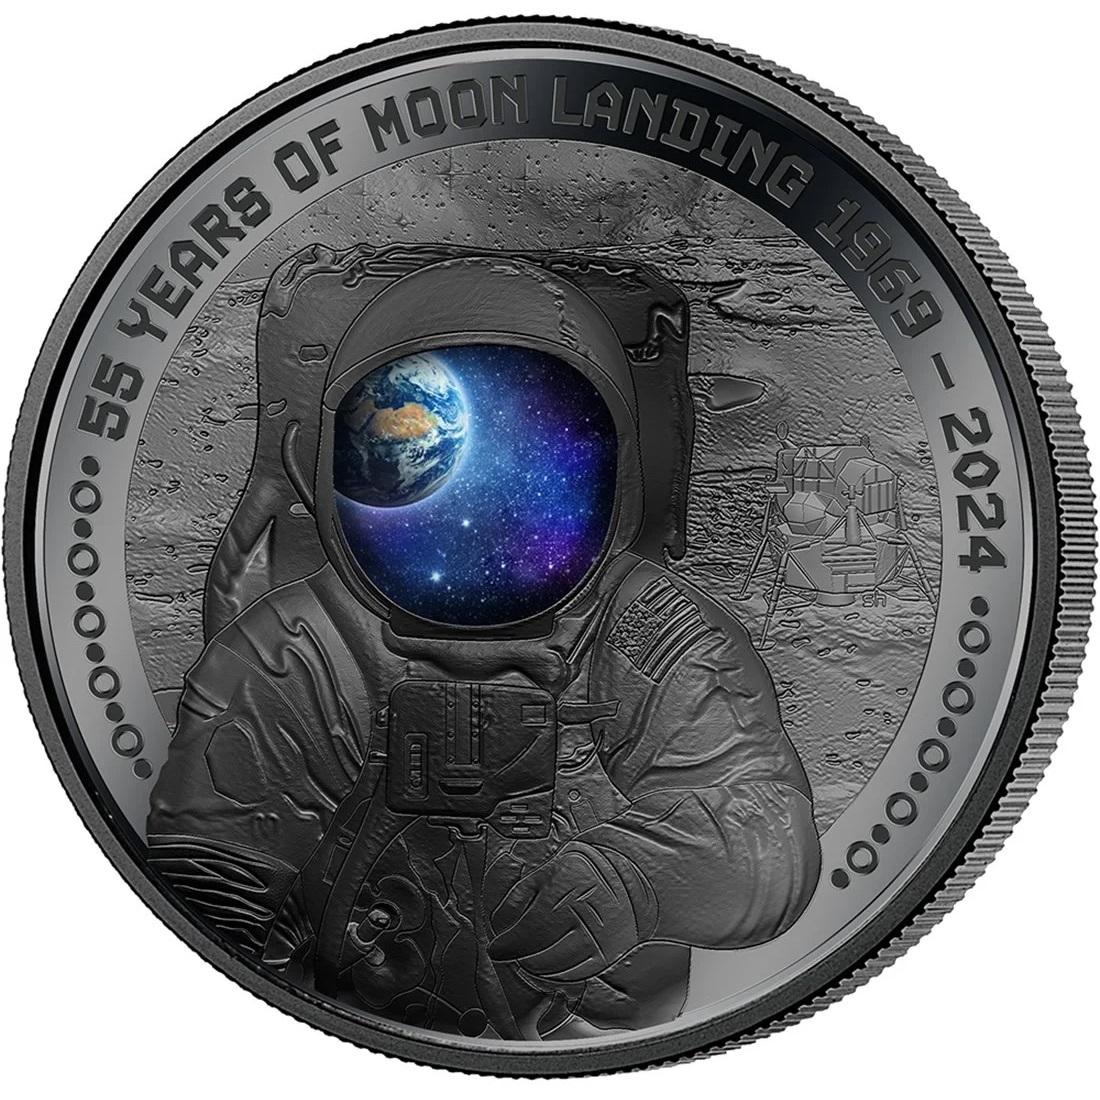 (W022.5.D.2024.1.oz.Ag.1567440110) 5 Dollars Barbados 2024 1 oz Black Proof silver - First man on the Moon Reverse (zoom)